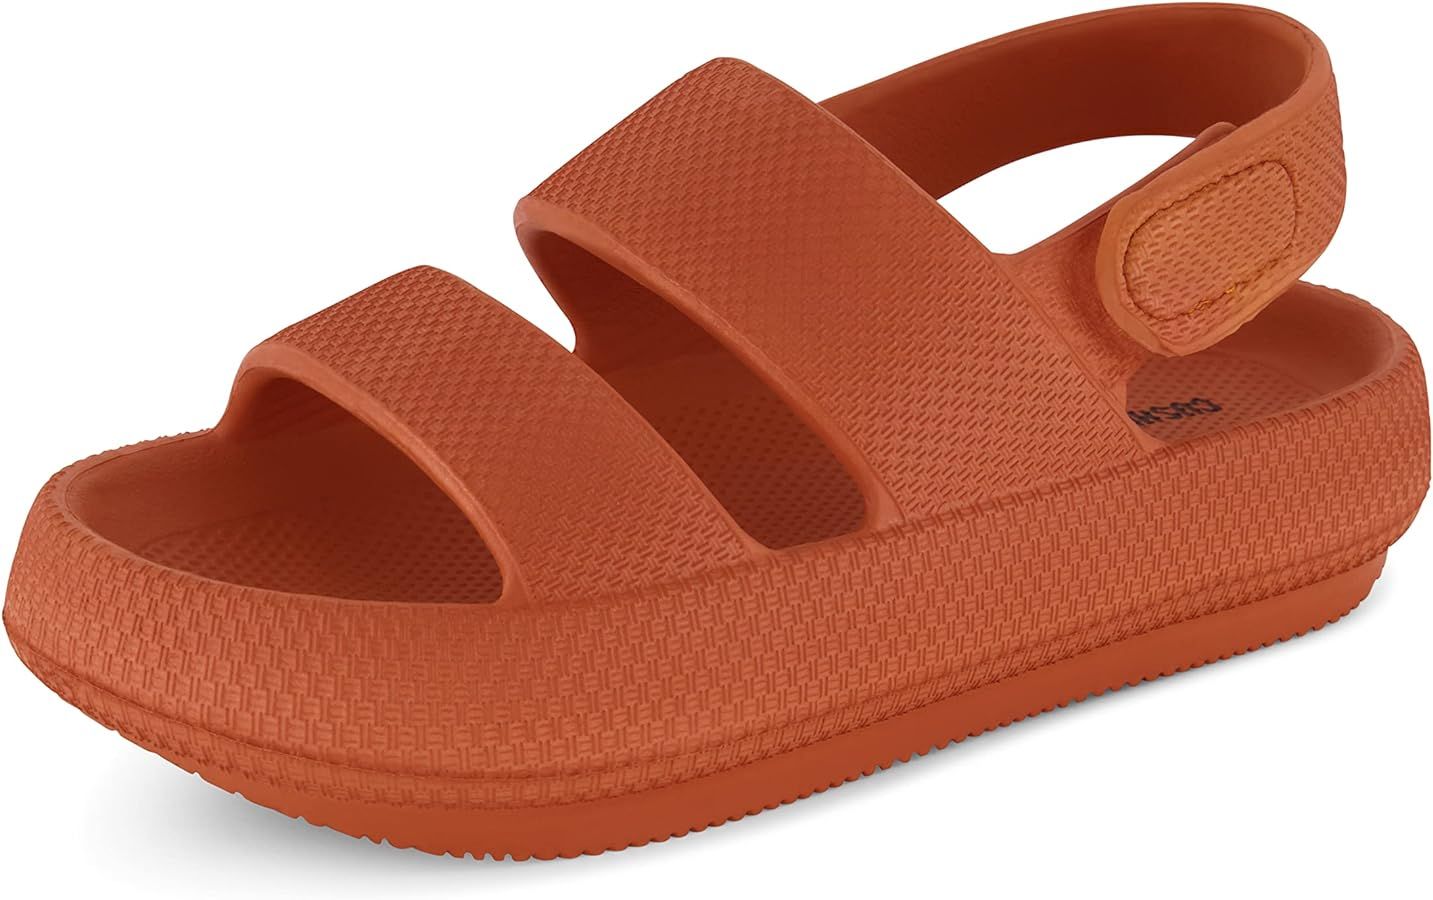 CUSHIONAIRE Women's Fuji sandal with adjustable strap and +Comfort | Amazon (US)